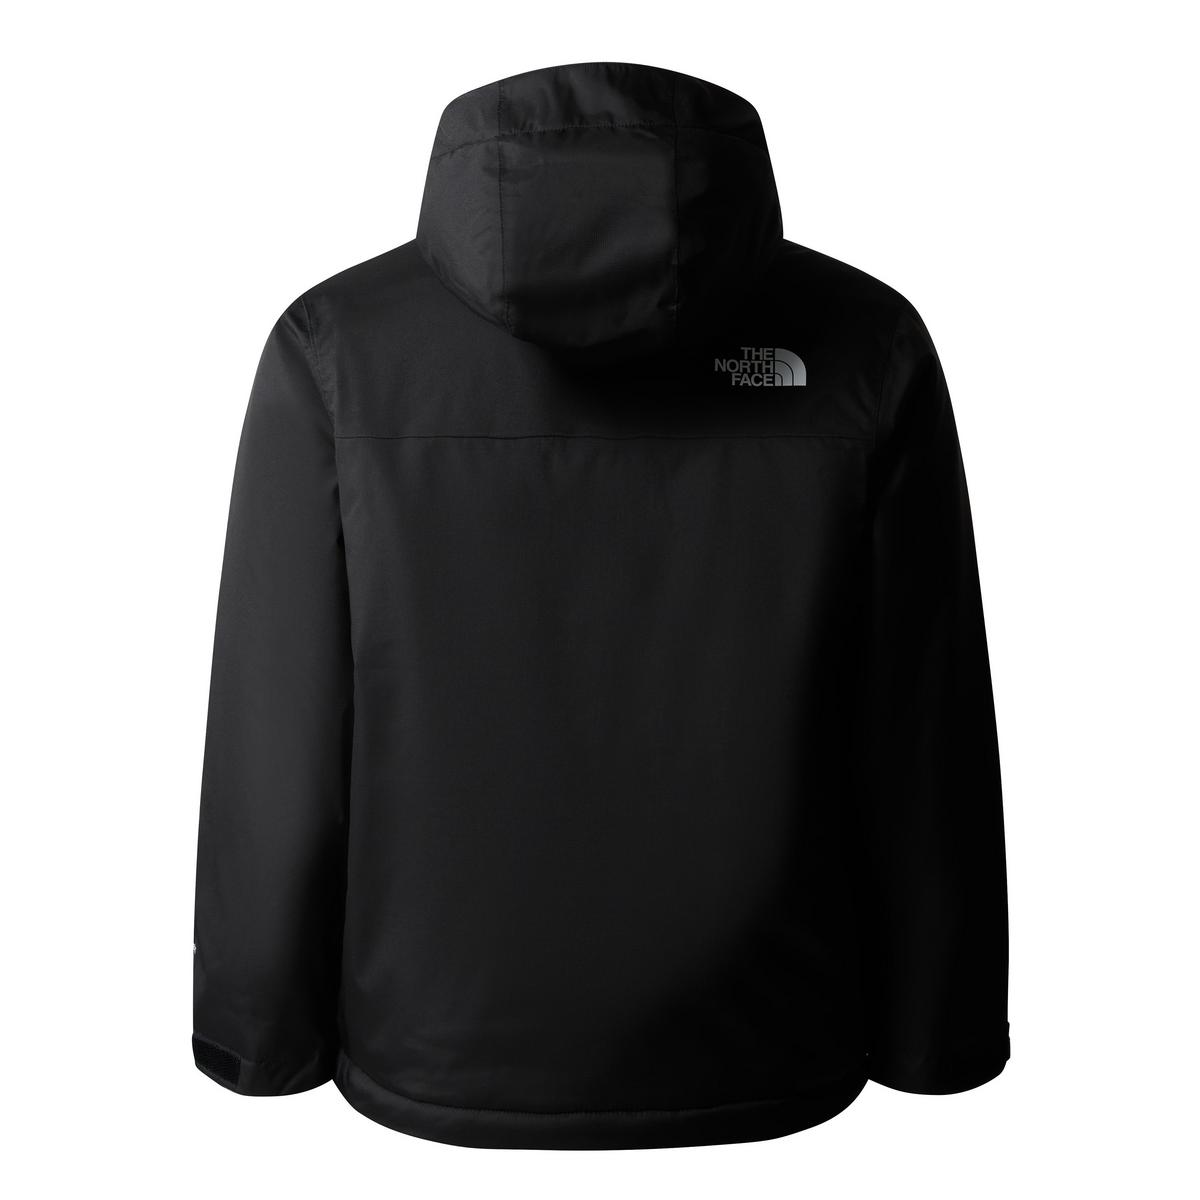 The North Face Teen's Snowquest Jacket - Black